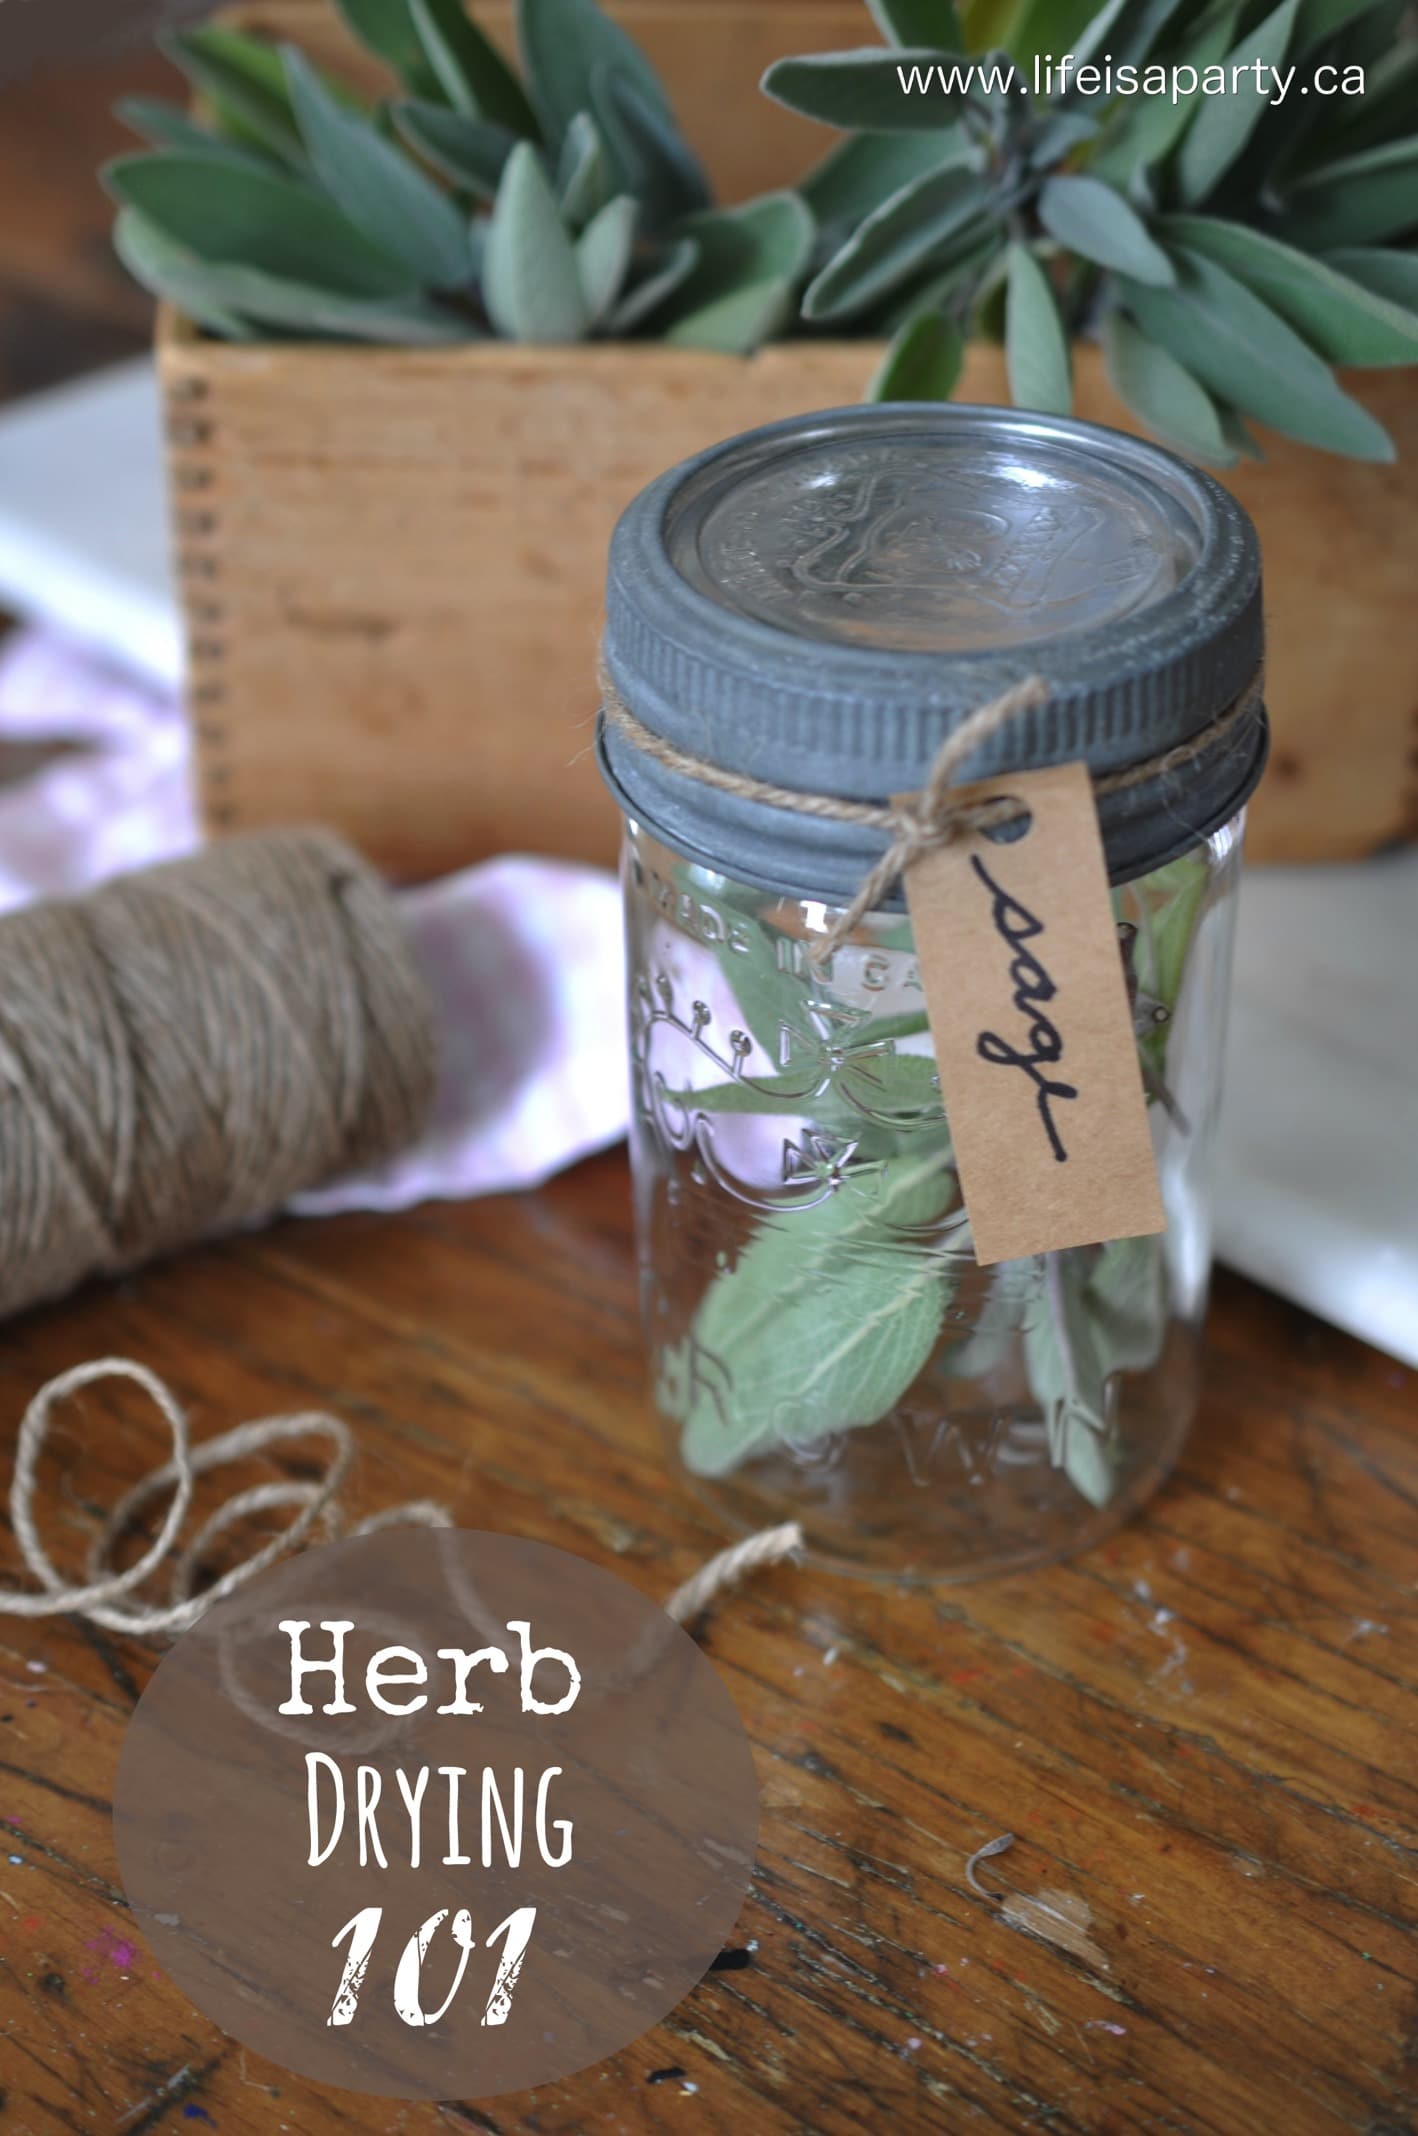 How To Dry Herbs -easy hanging method anyone can do at home. Enjoy garden herbs year round by drying them to use in the winter.